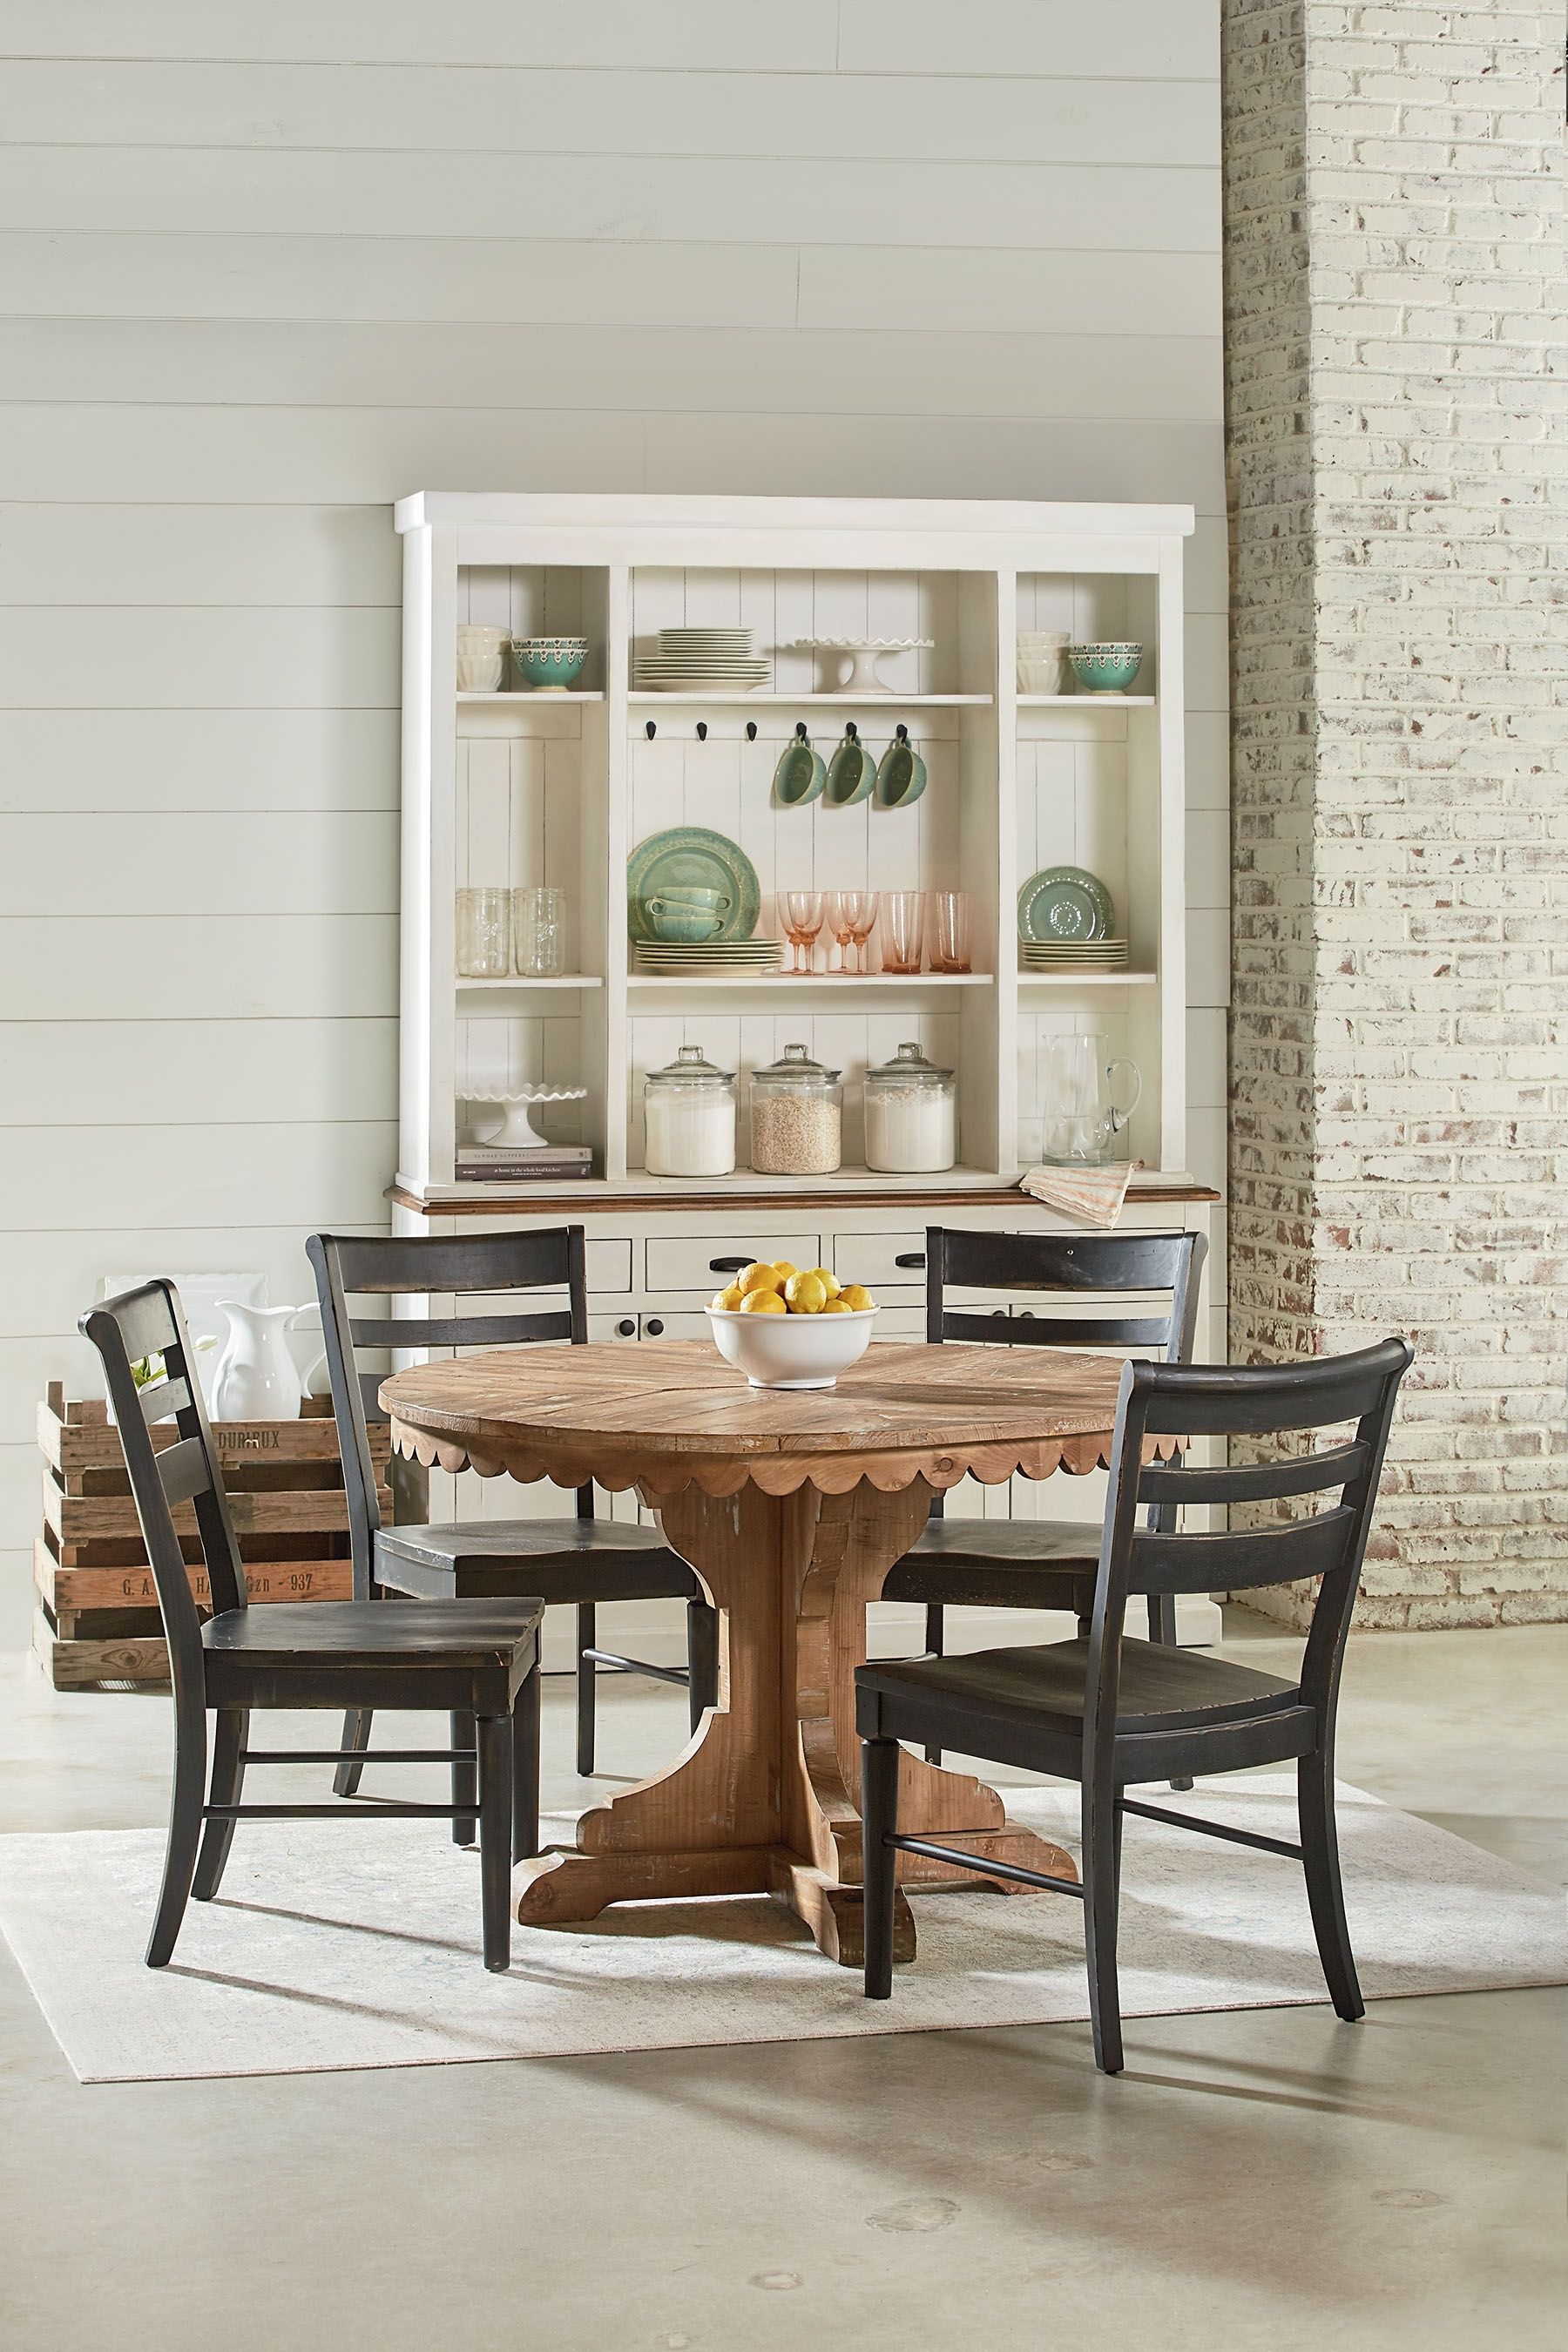 Top Tier Pedestal Table – Magnolia Home Throughout Most Up To Date Magnolia Home Top Tier Round Dining Tables (View 2 of 20)